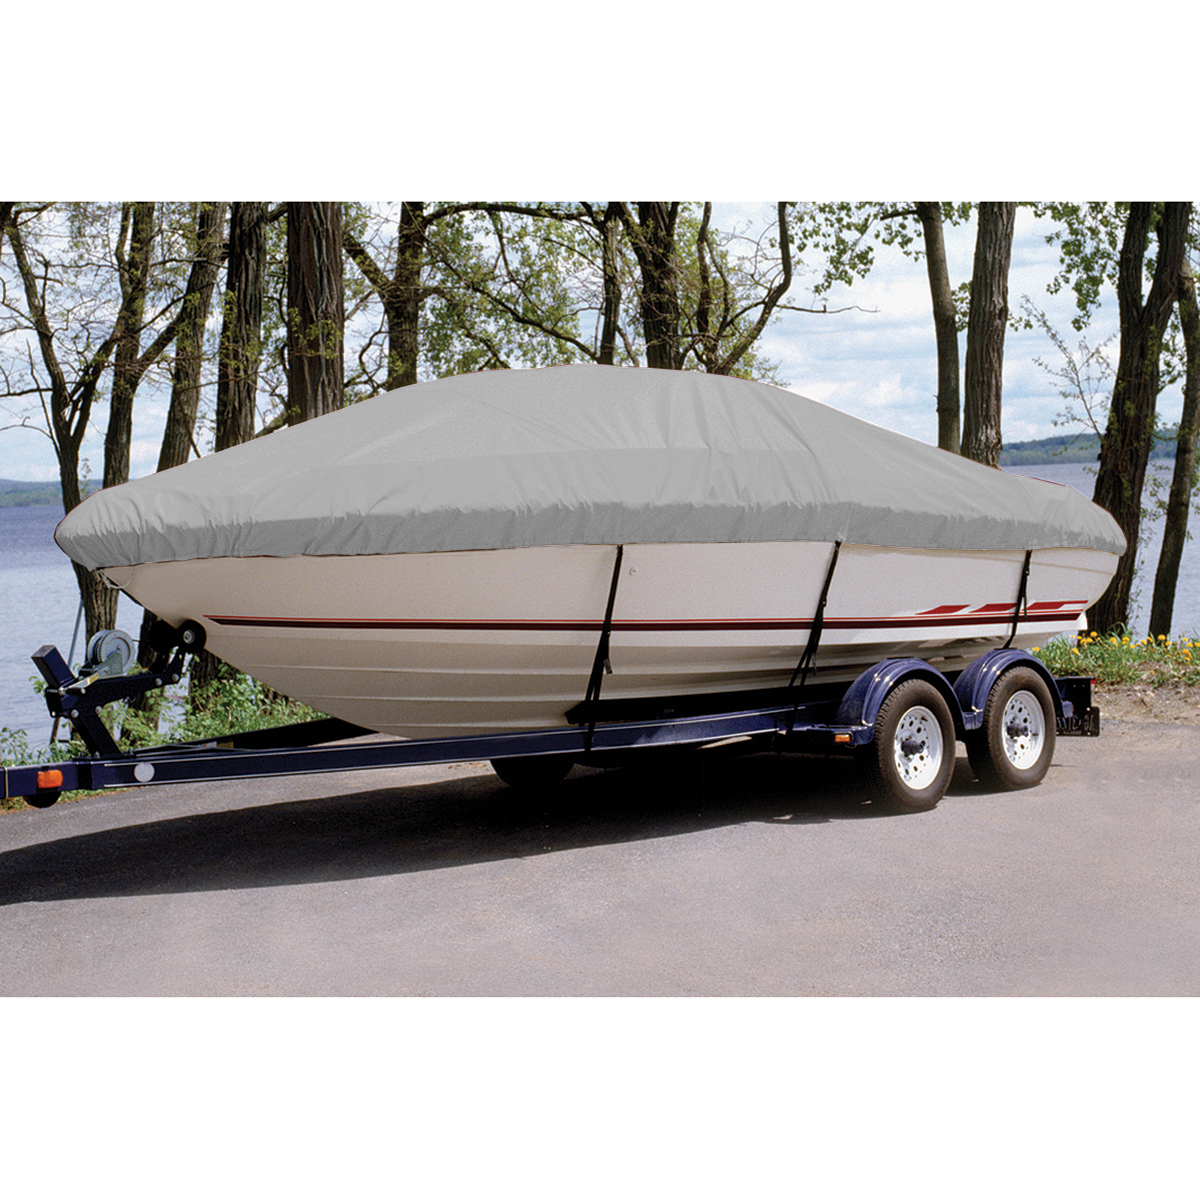 Boat Cover Compatible for CRESTLINER Serenity 1800 O/B 2005 Heavy-Duty